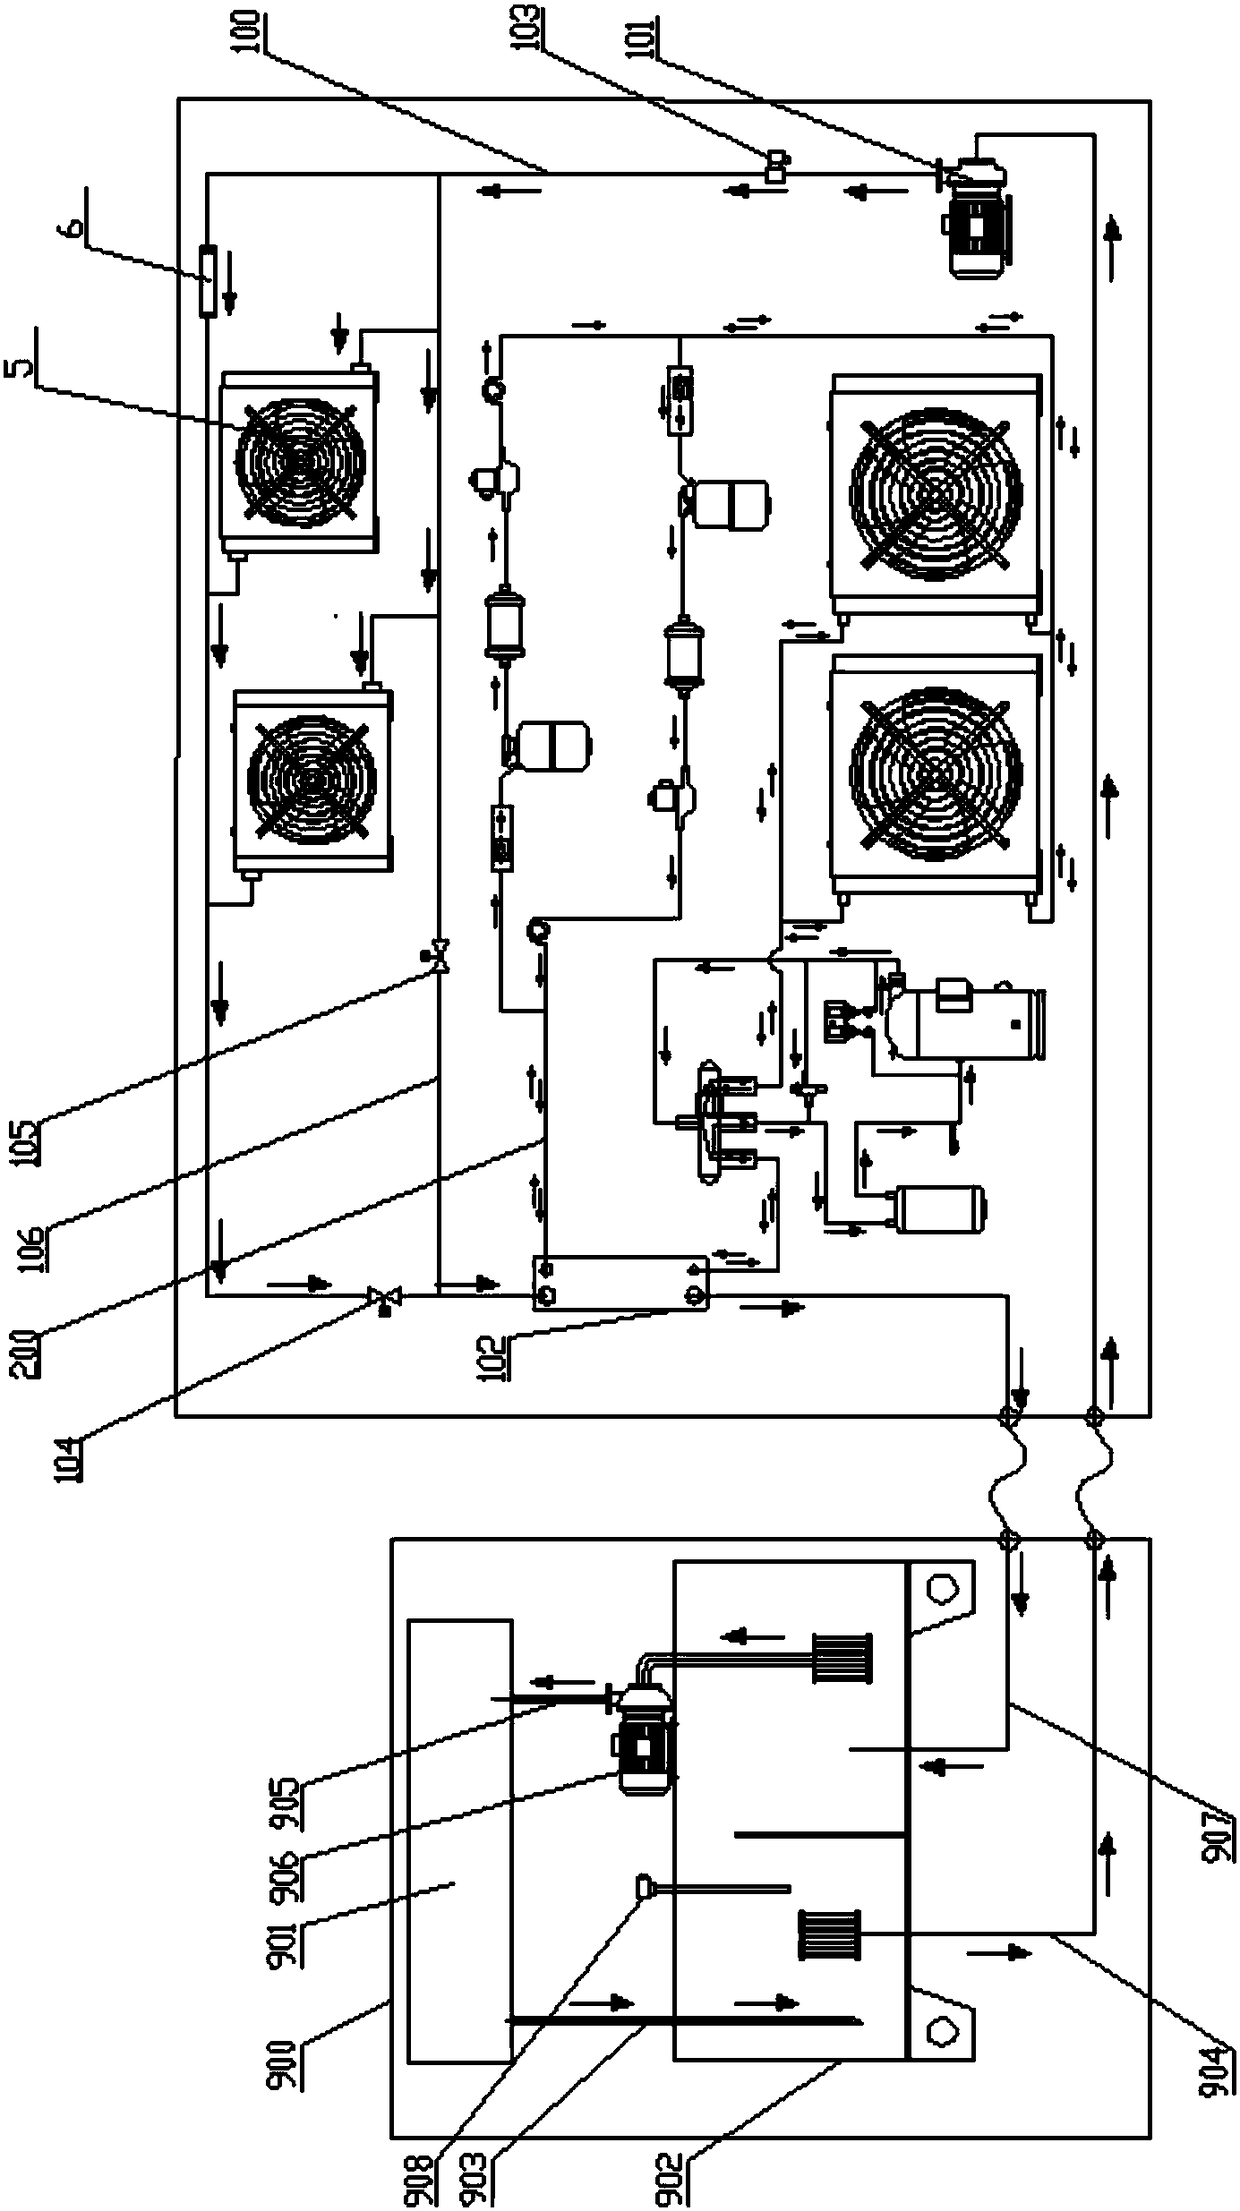 Four-way industrial thermostat unit with hydraulic bypasses with piston type pressure release valves